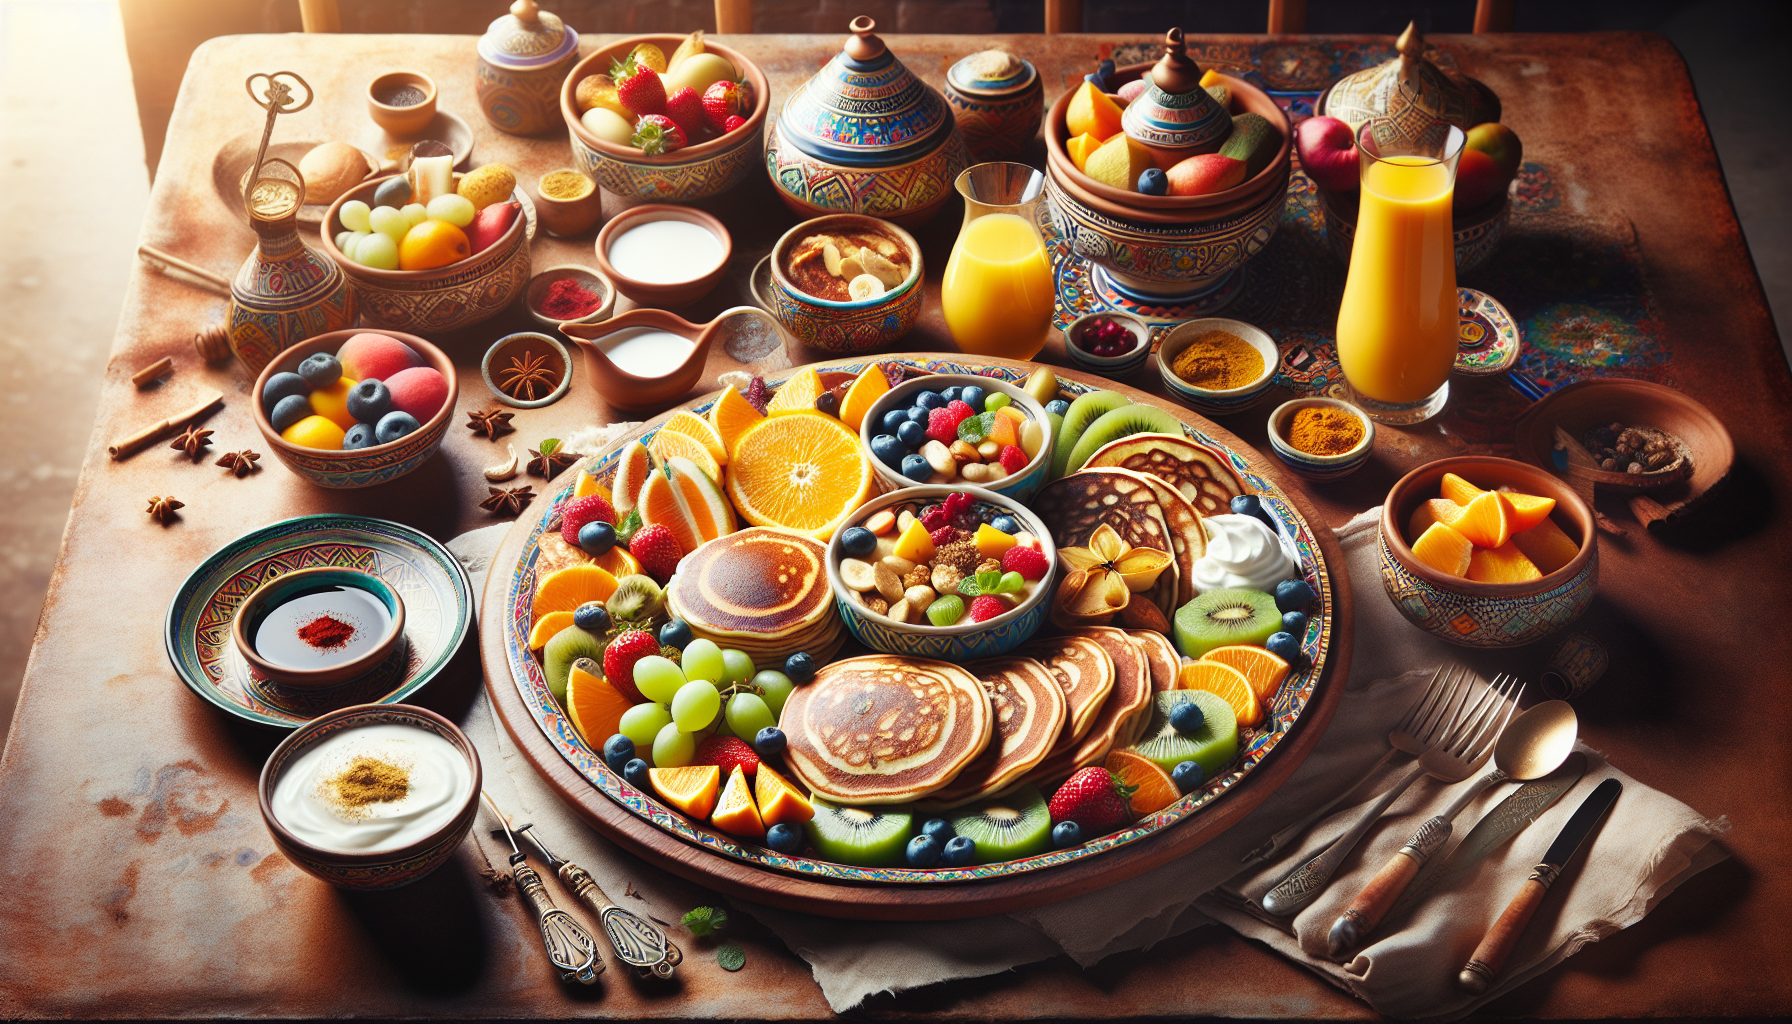 Whats Your Favorite 15-minute Moroccan Breakfast Recipe For A Nutritious Start?